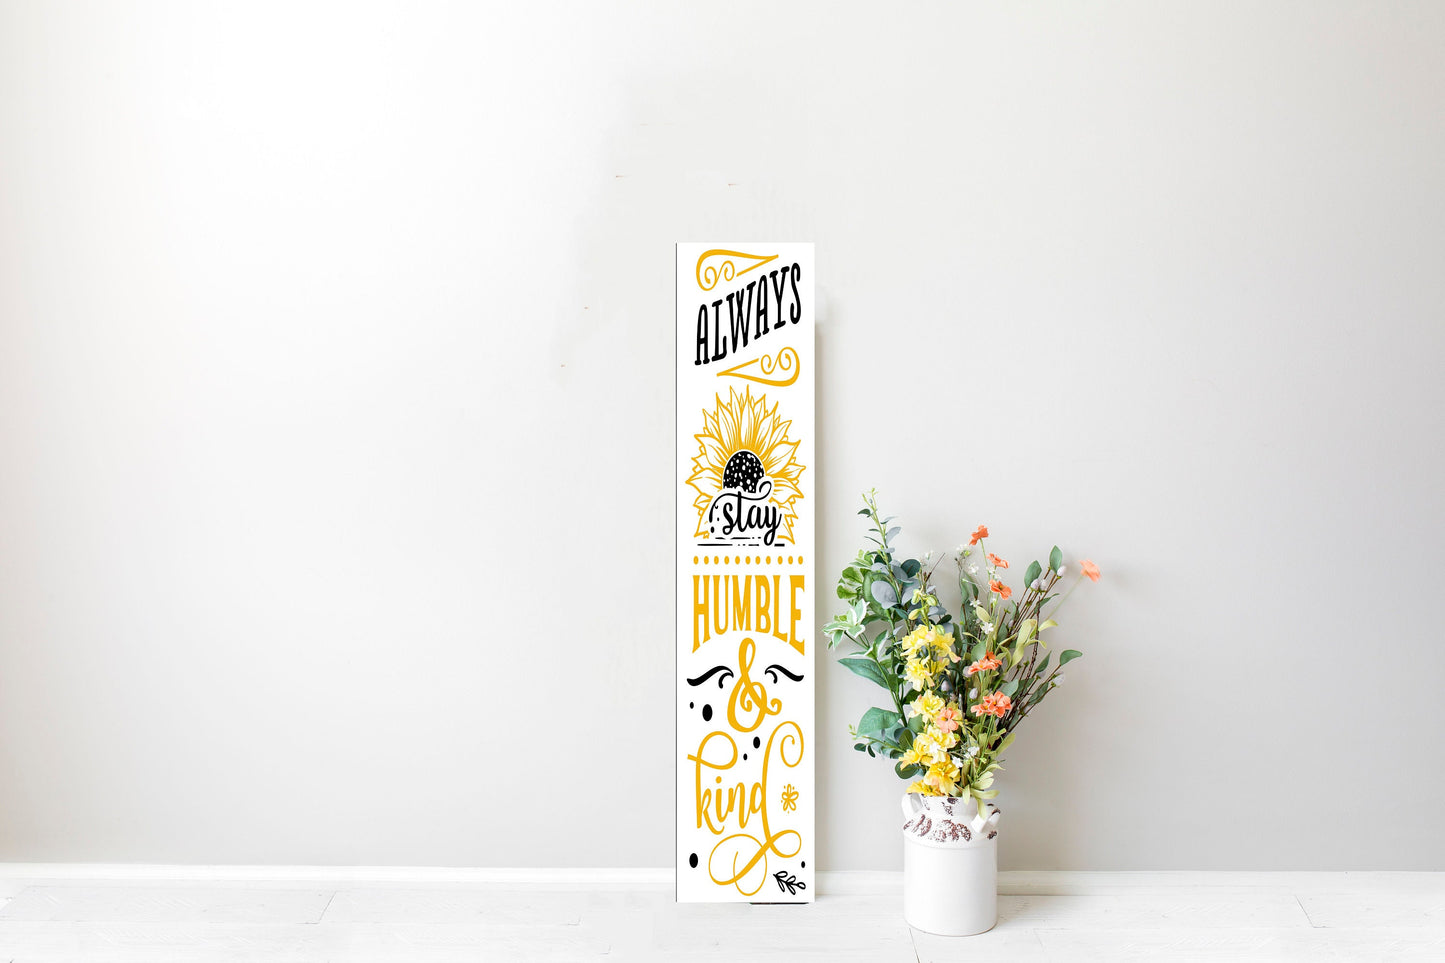 24 Inch (2 Foot Tall) Black or White Always Stay Humble and Kind Vertical Wood Print Sign